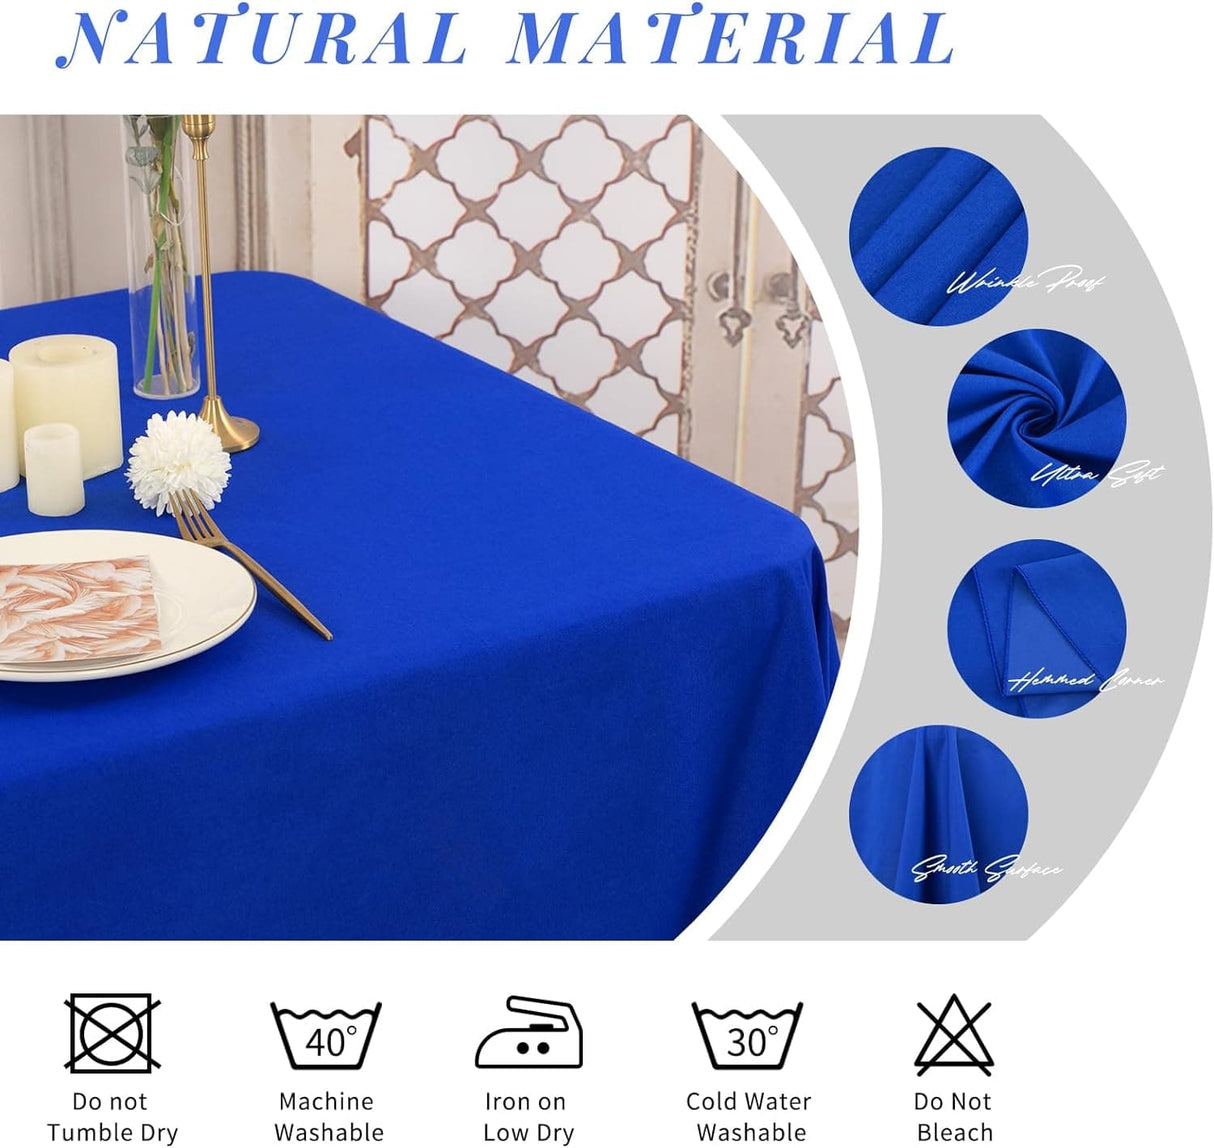 2/4/6 Pack Tablecloth 60 x 102 inch Polyester Table Cloth for 6 Foot Rectangle Tables,Stain and Wrinkle Resistant Washable Fabric Table Covers Polyester Beige Table Clothes for Wedding,Party,Banquet